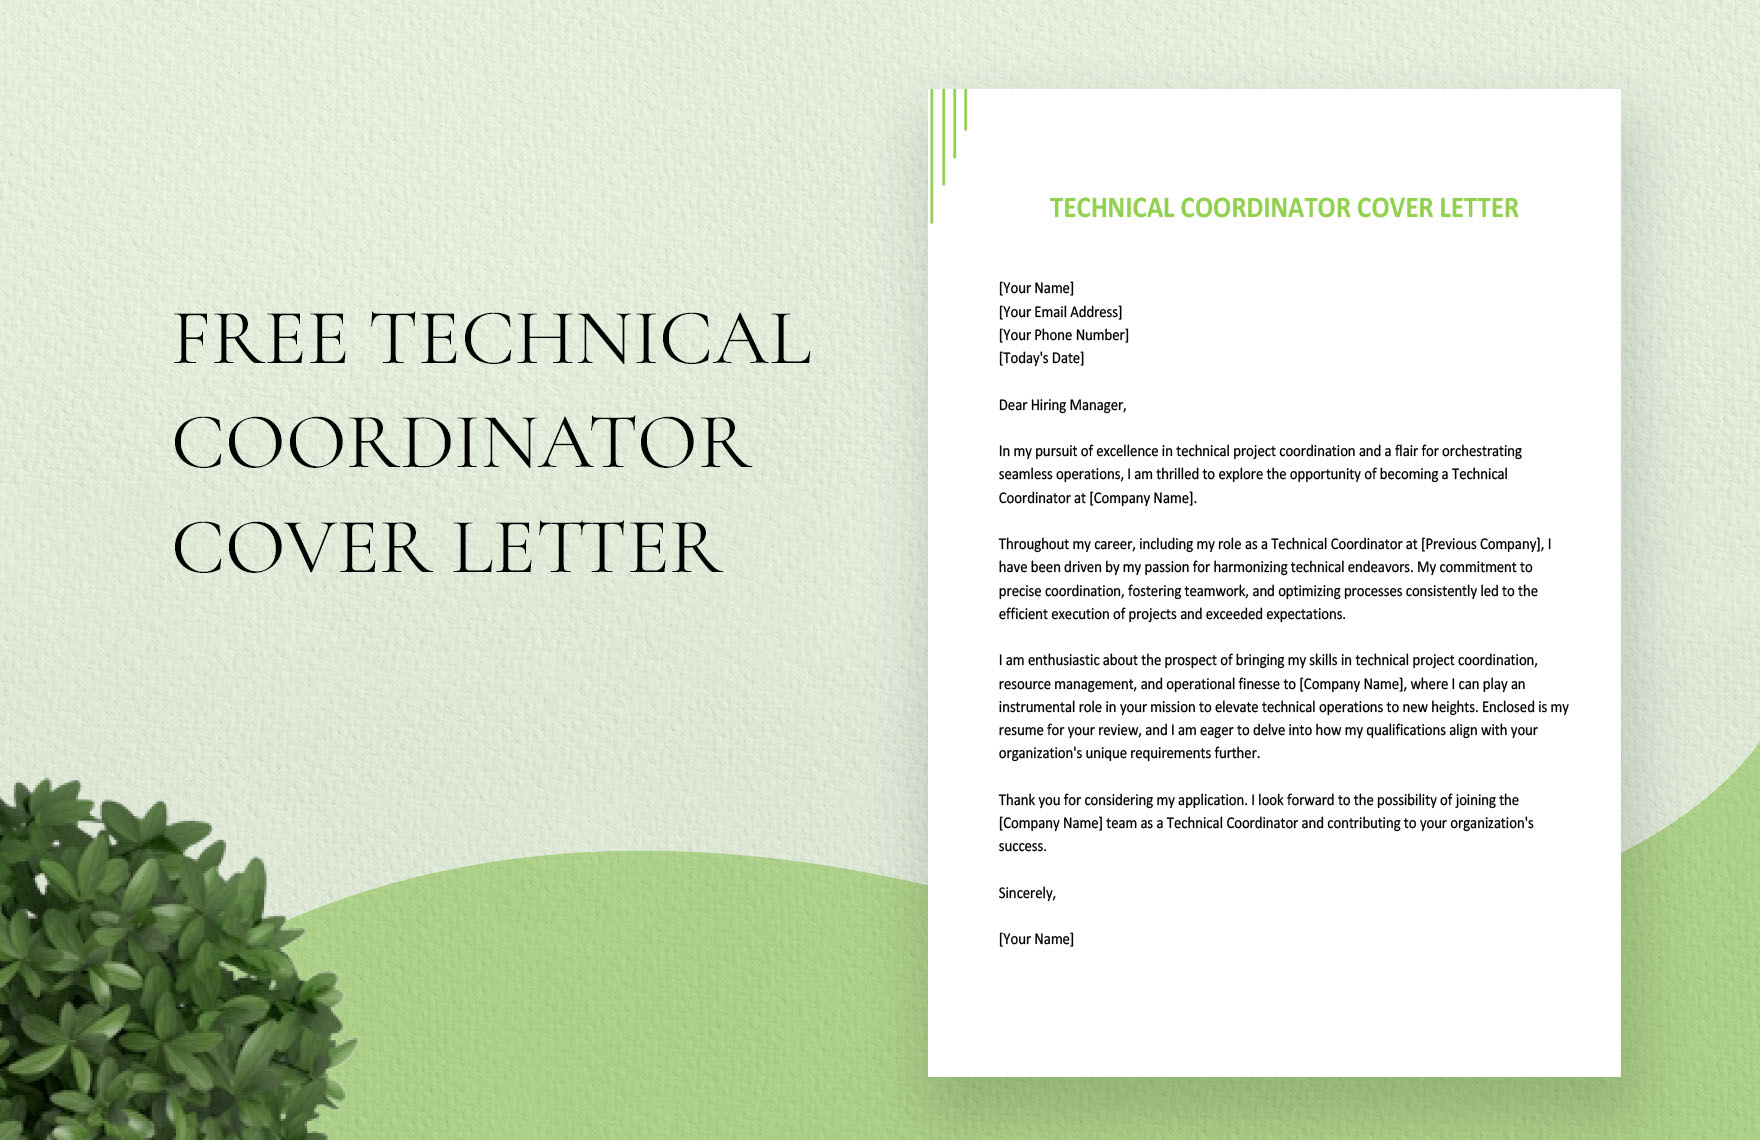 Technical Coordinator Cover Letter